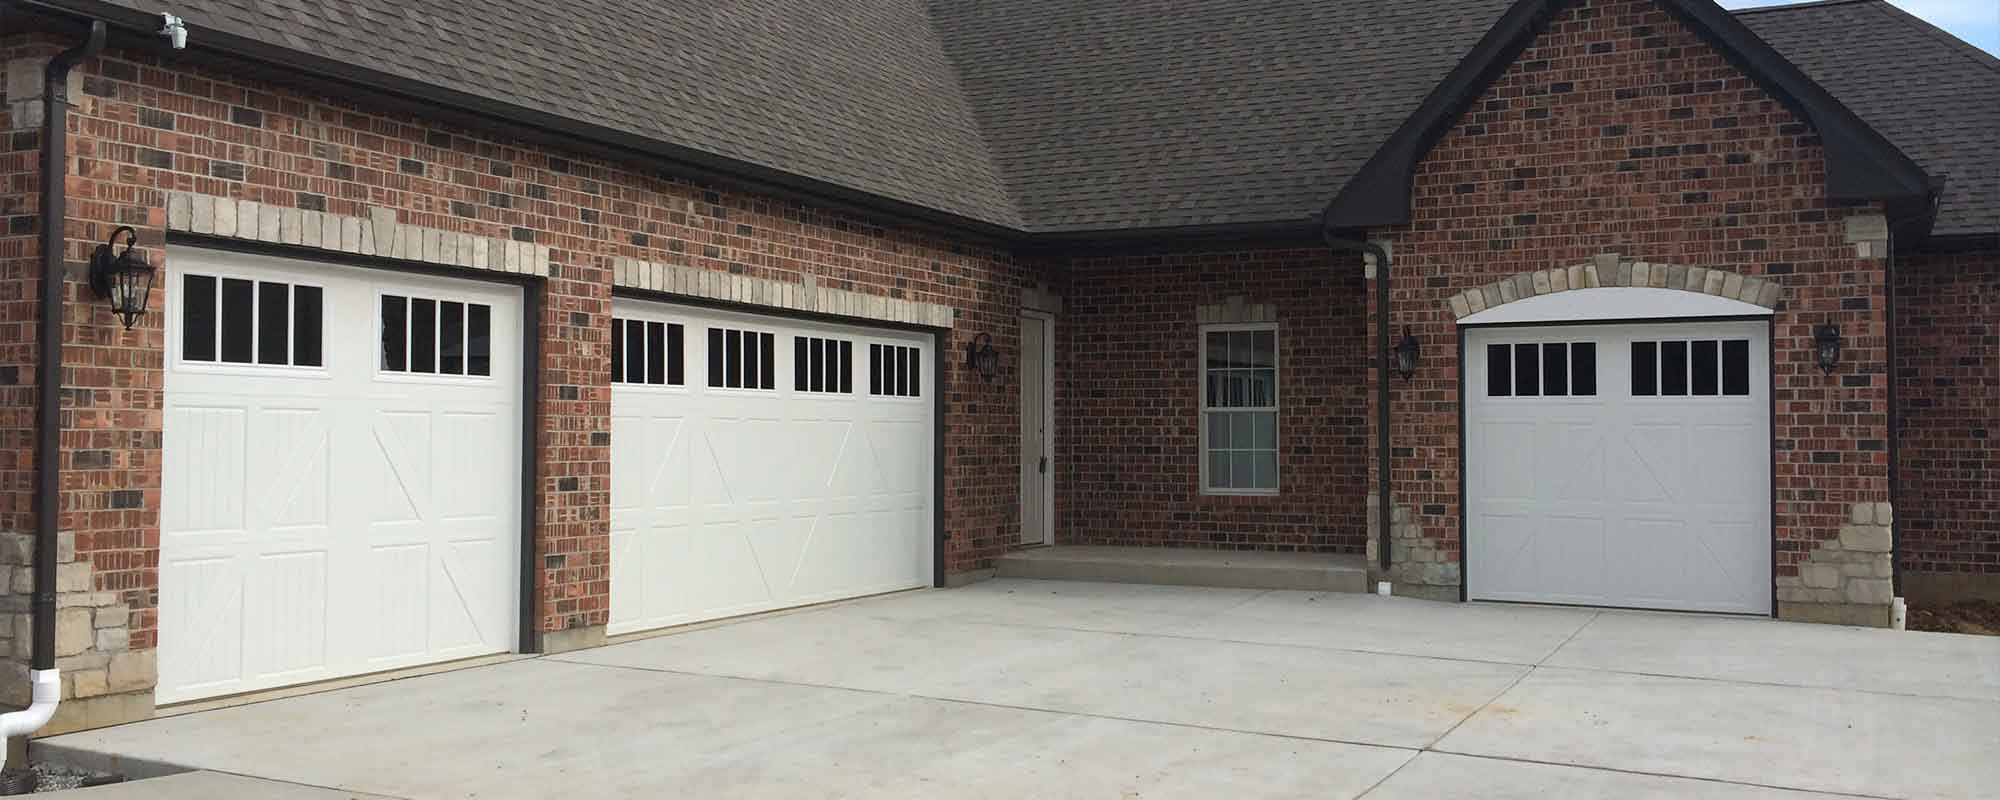 Garage Doors In Perryville Mo Cape Girardeau Mo Perryville in size 2000 X 800